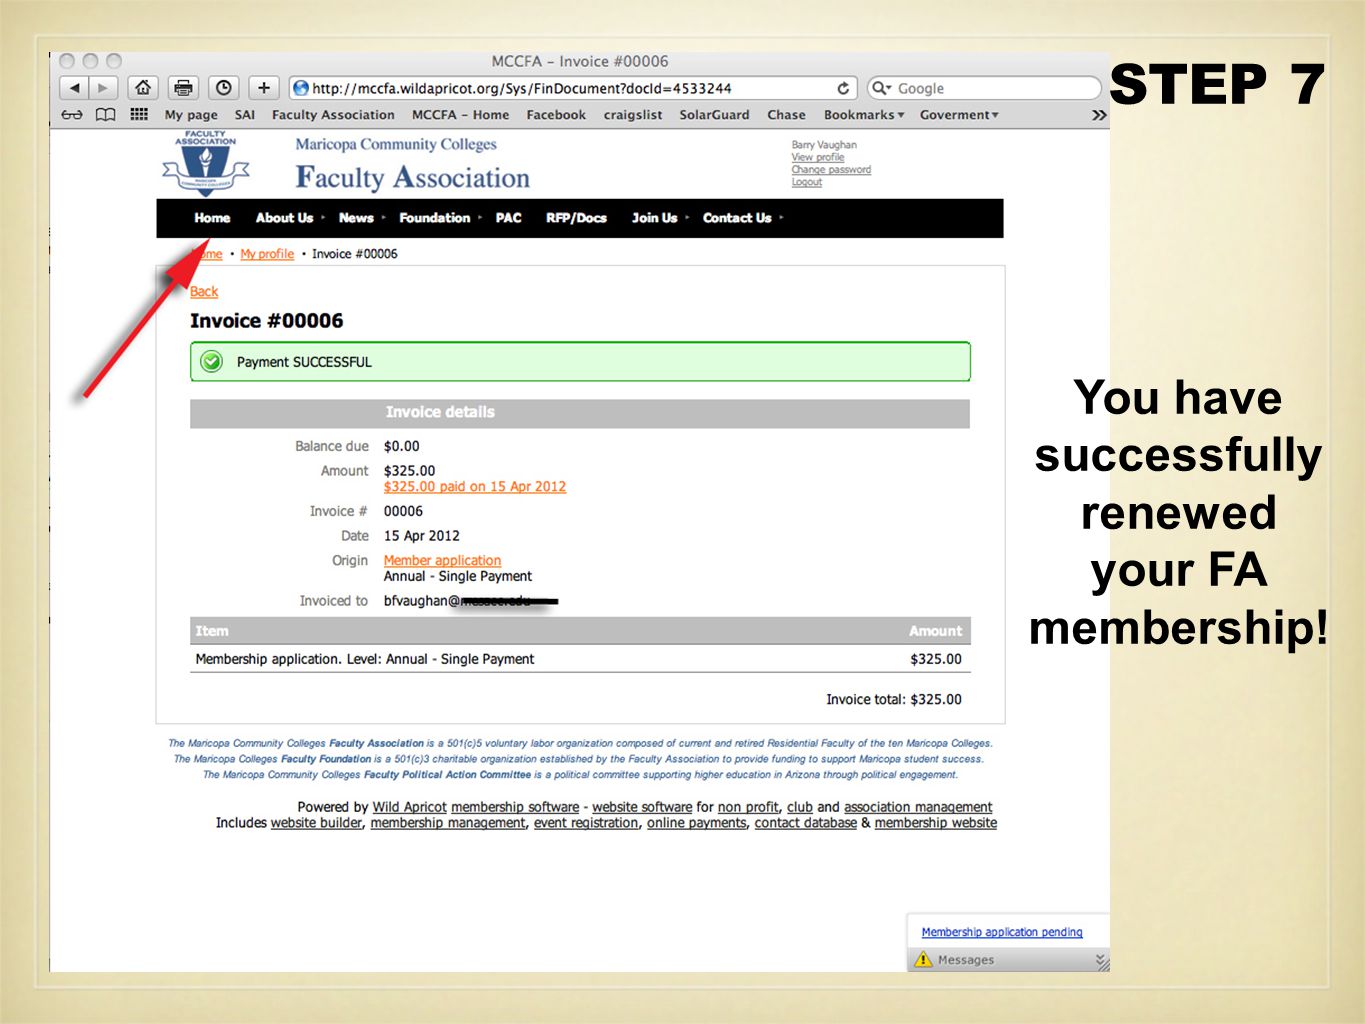 You have successfully renewed your FA membership! STEP 7